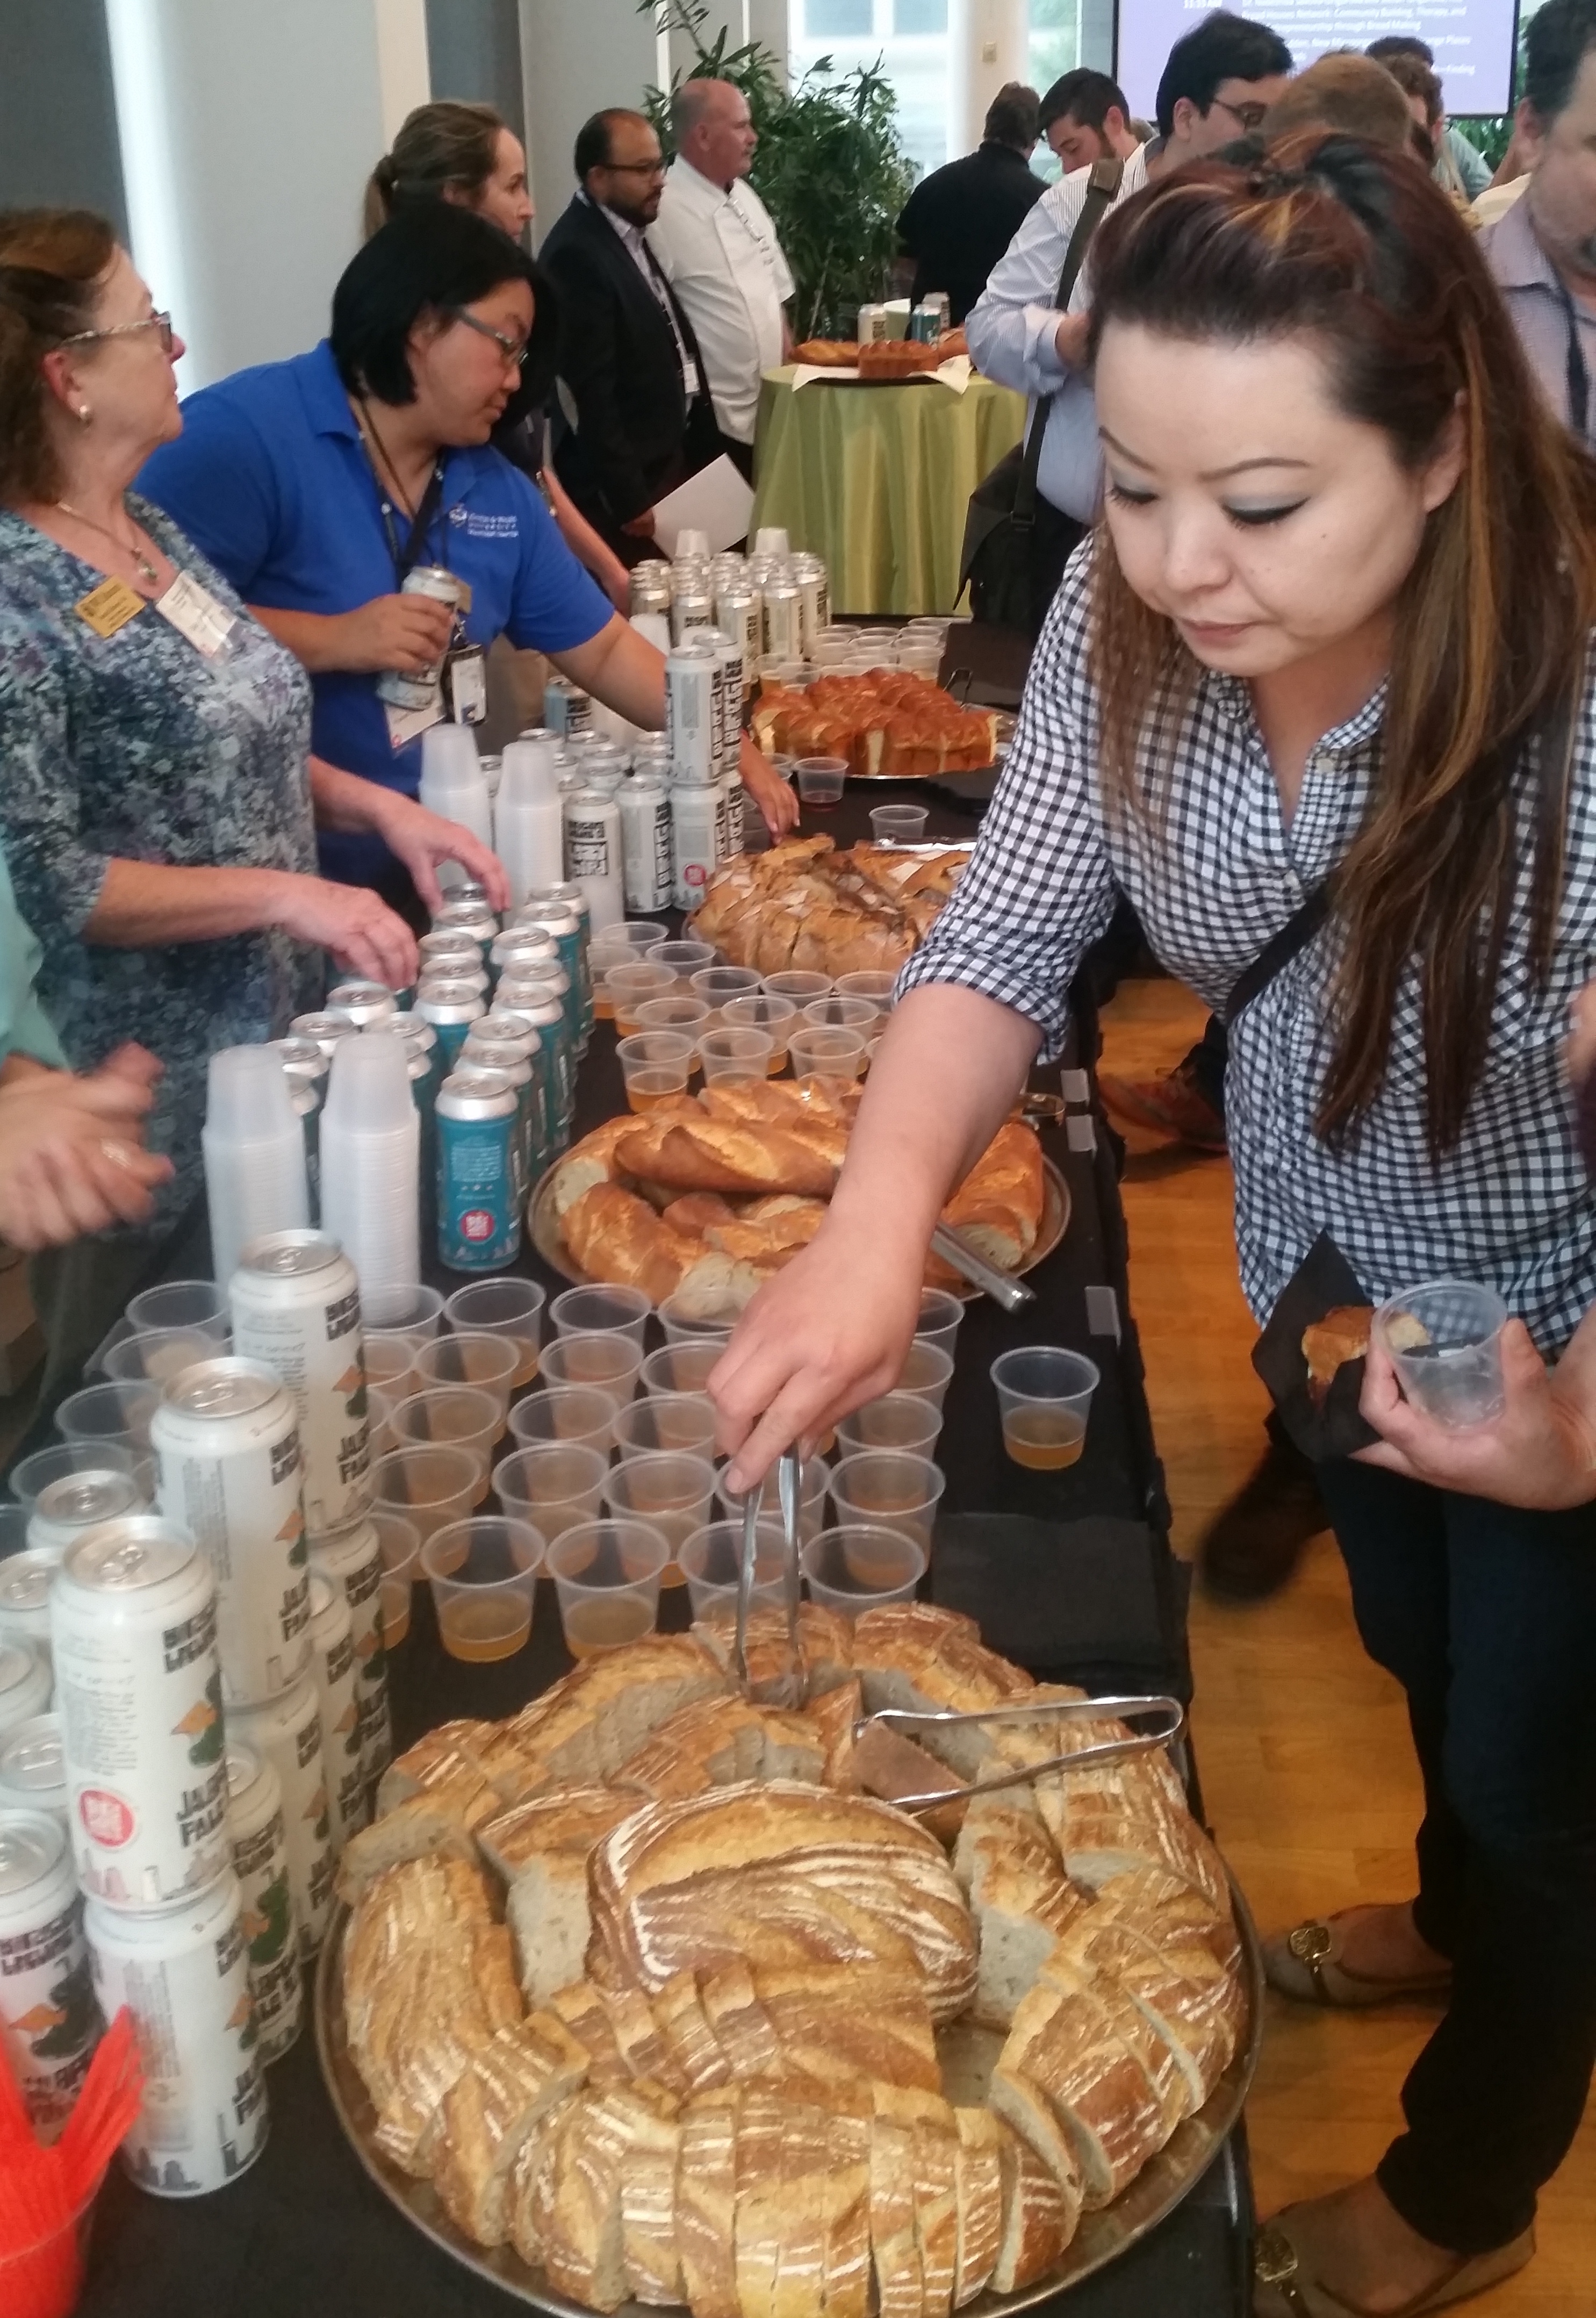 A woman sampling bread and beer